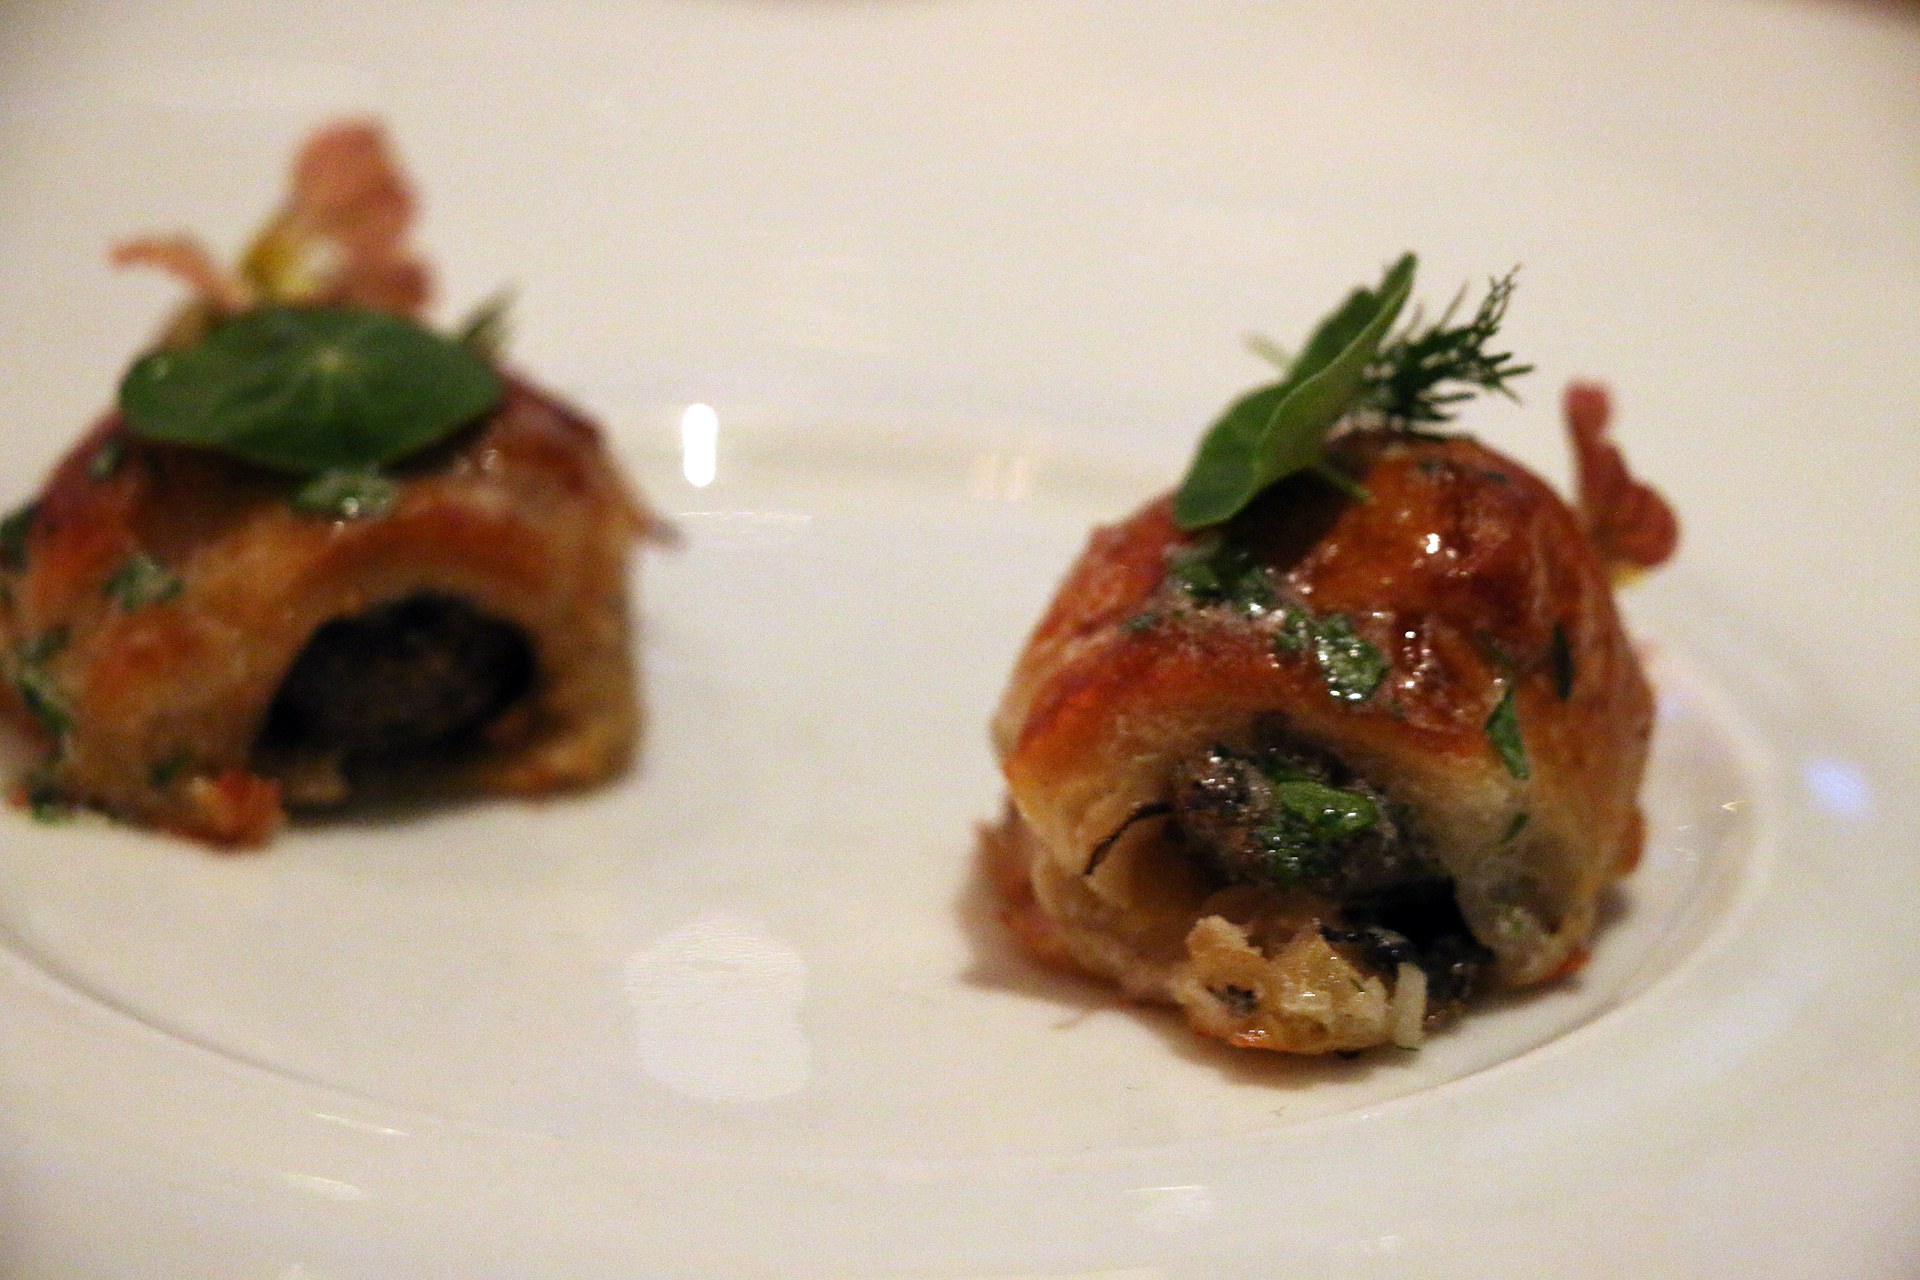 An amuse bouche of escargot bathed in chartreuse butter and tucked into a mini-croissant.